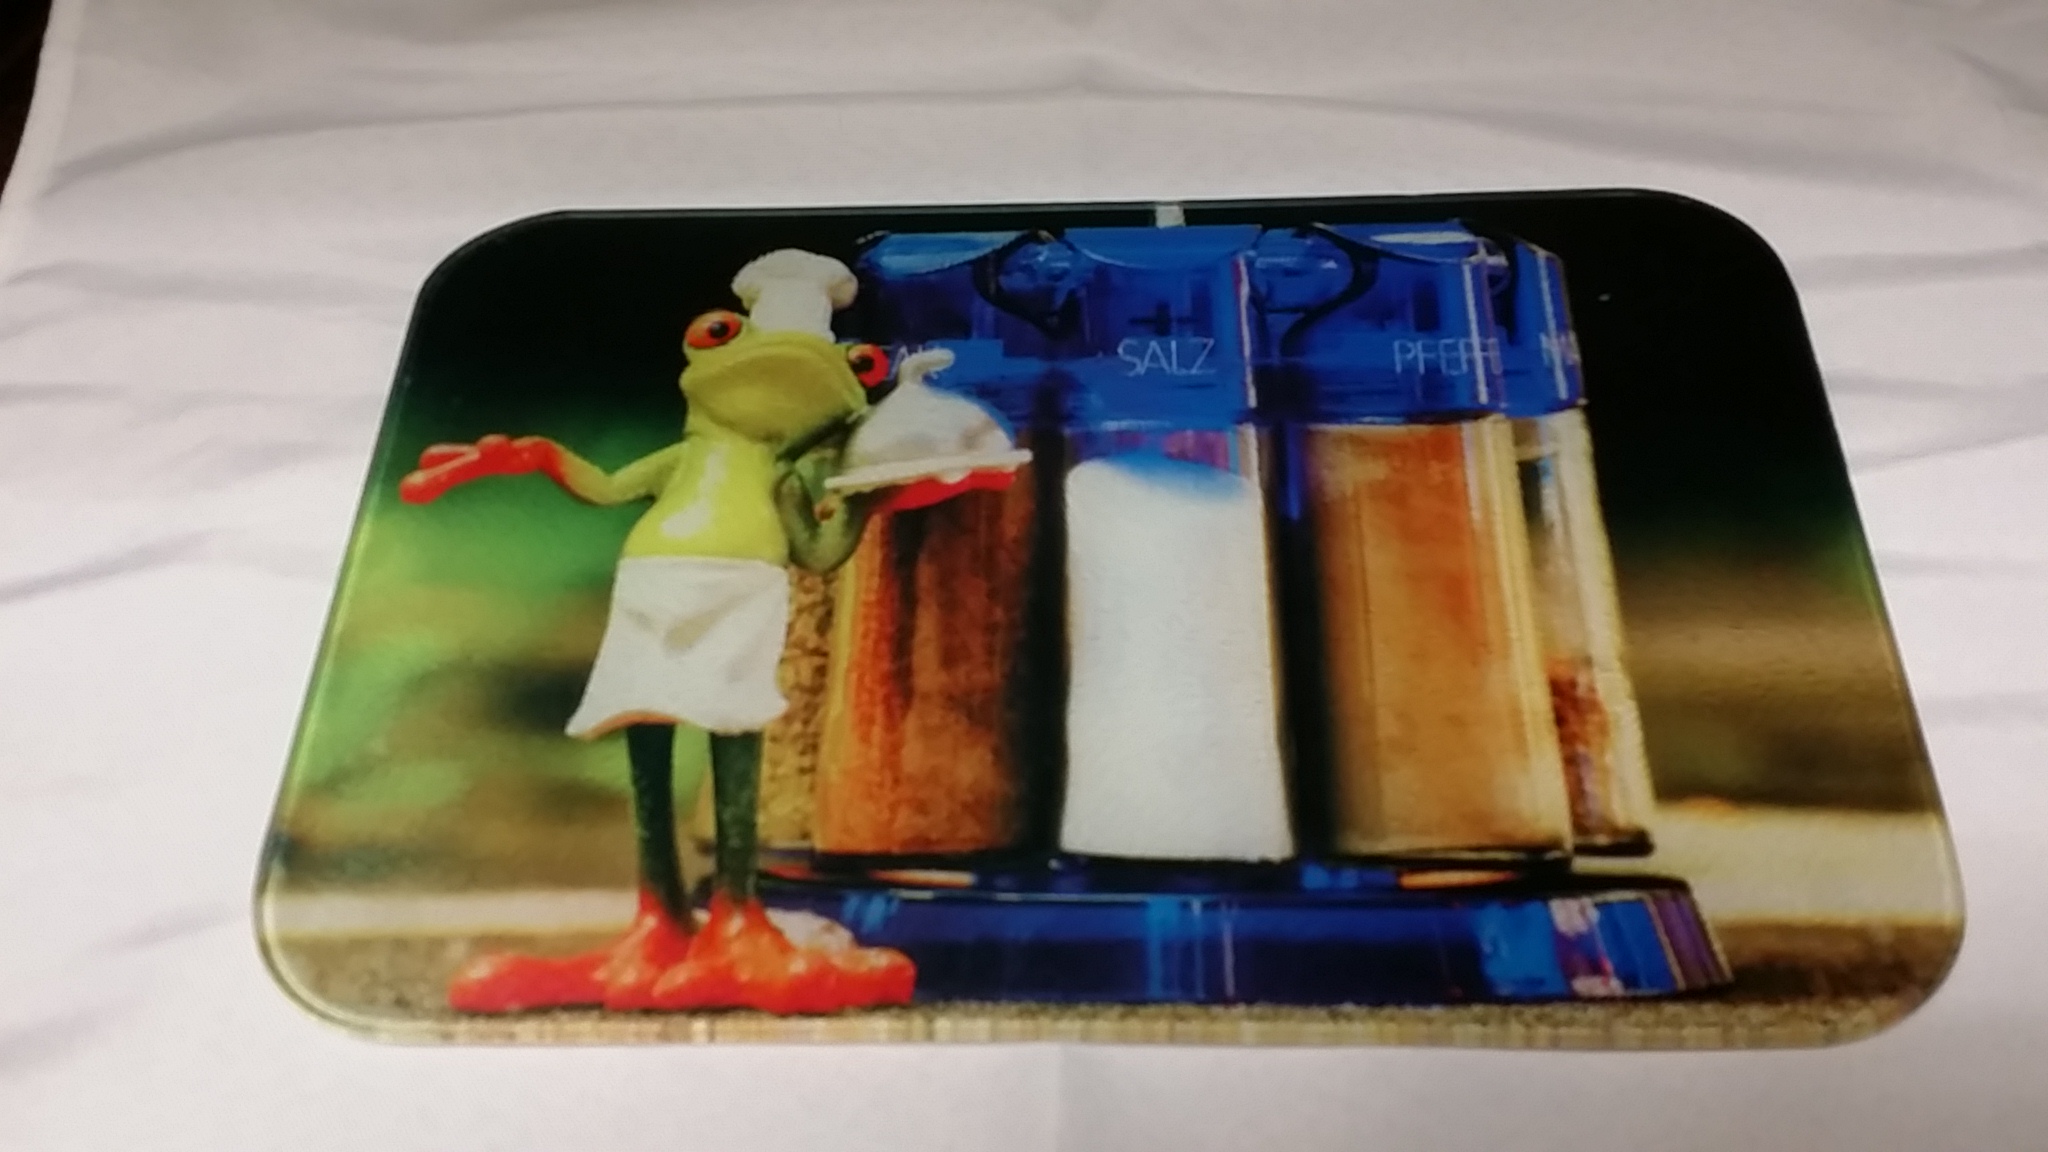 MAINE CUTTING/CHEESE BOARD made with sublimation printing